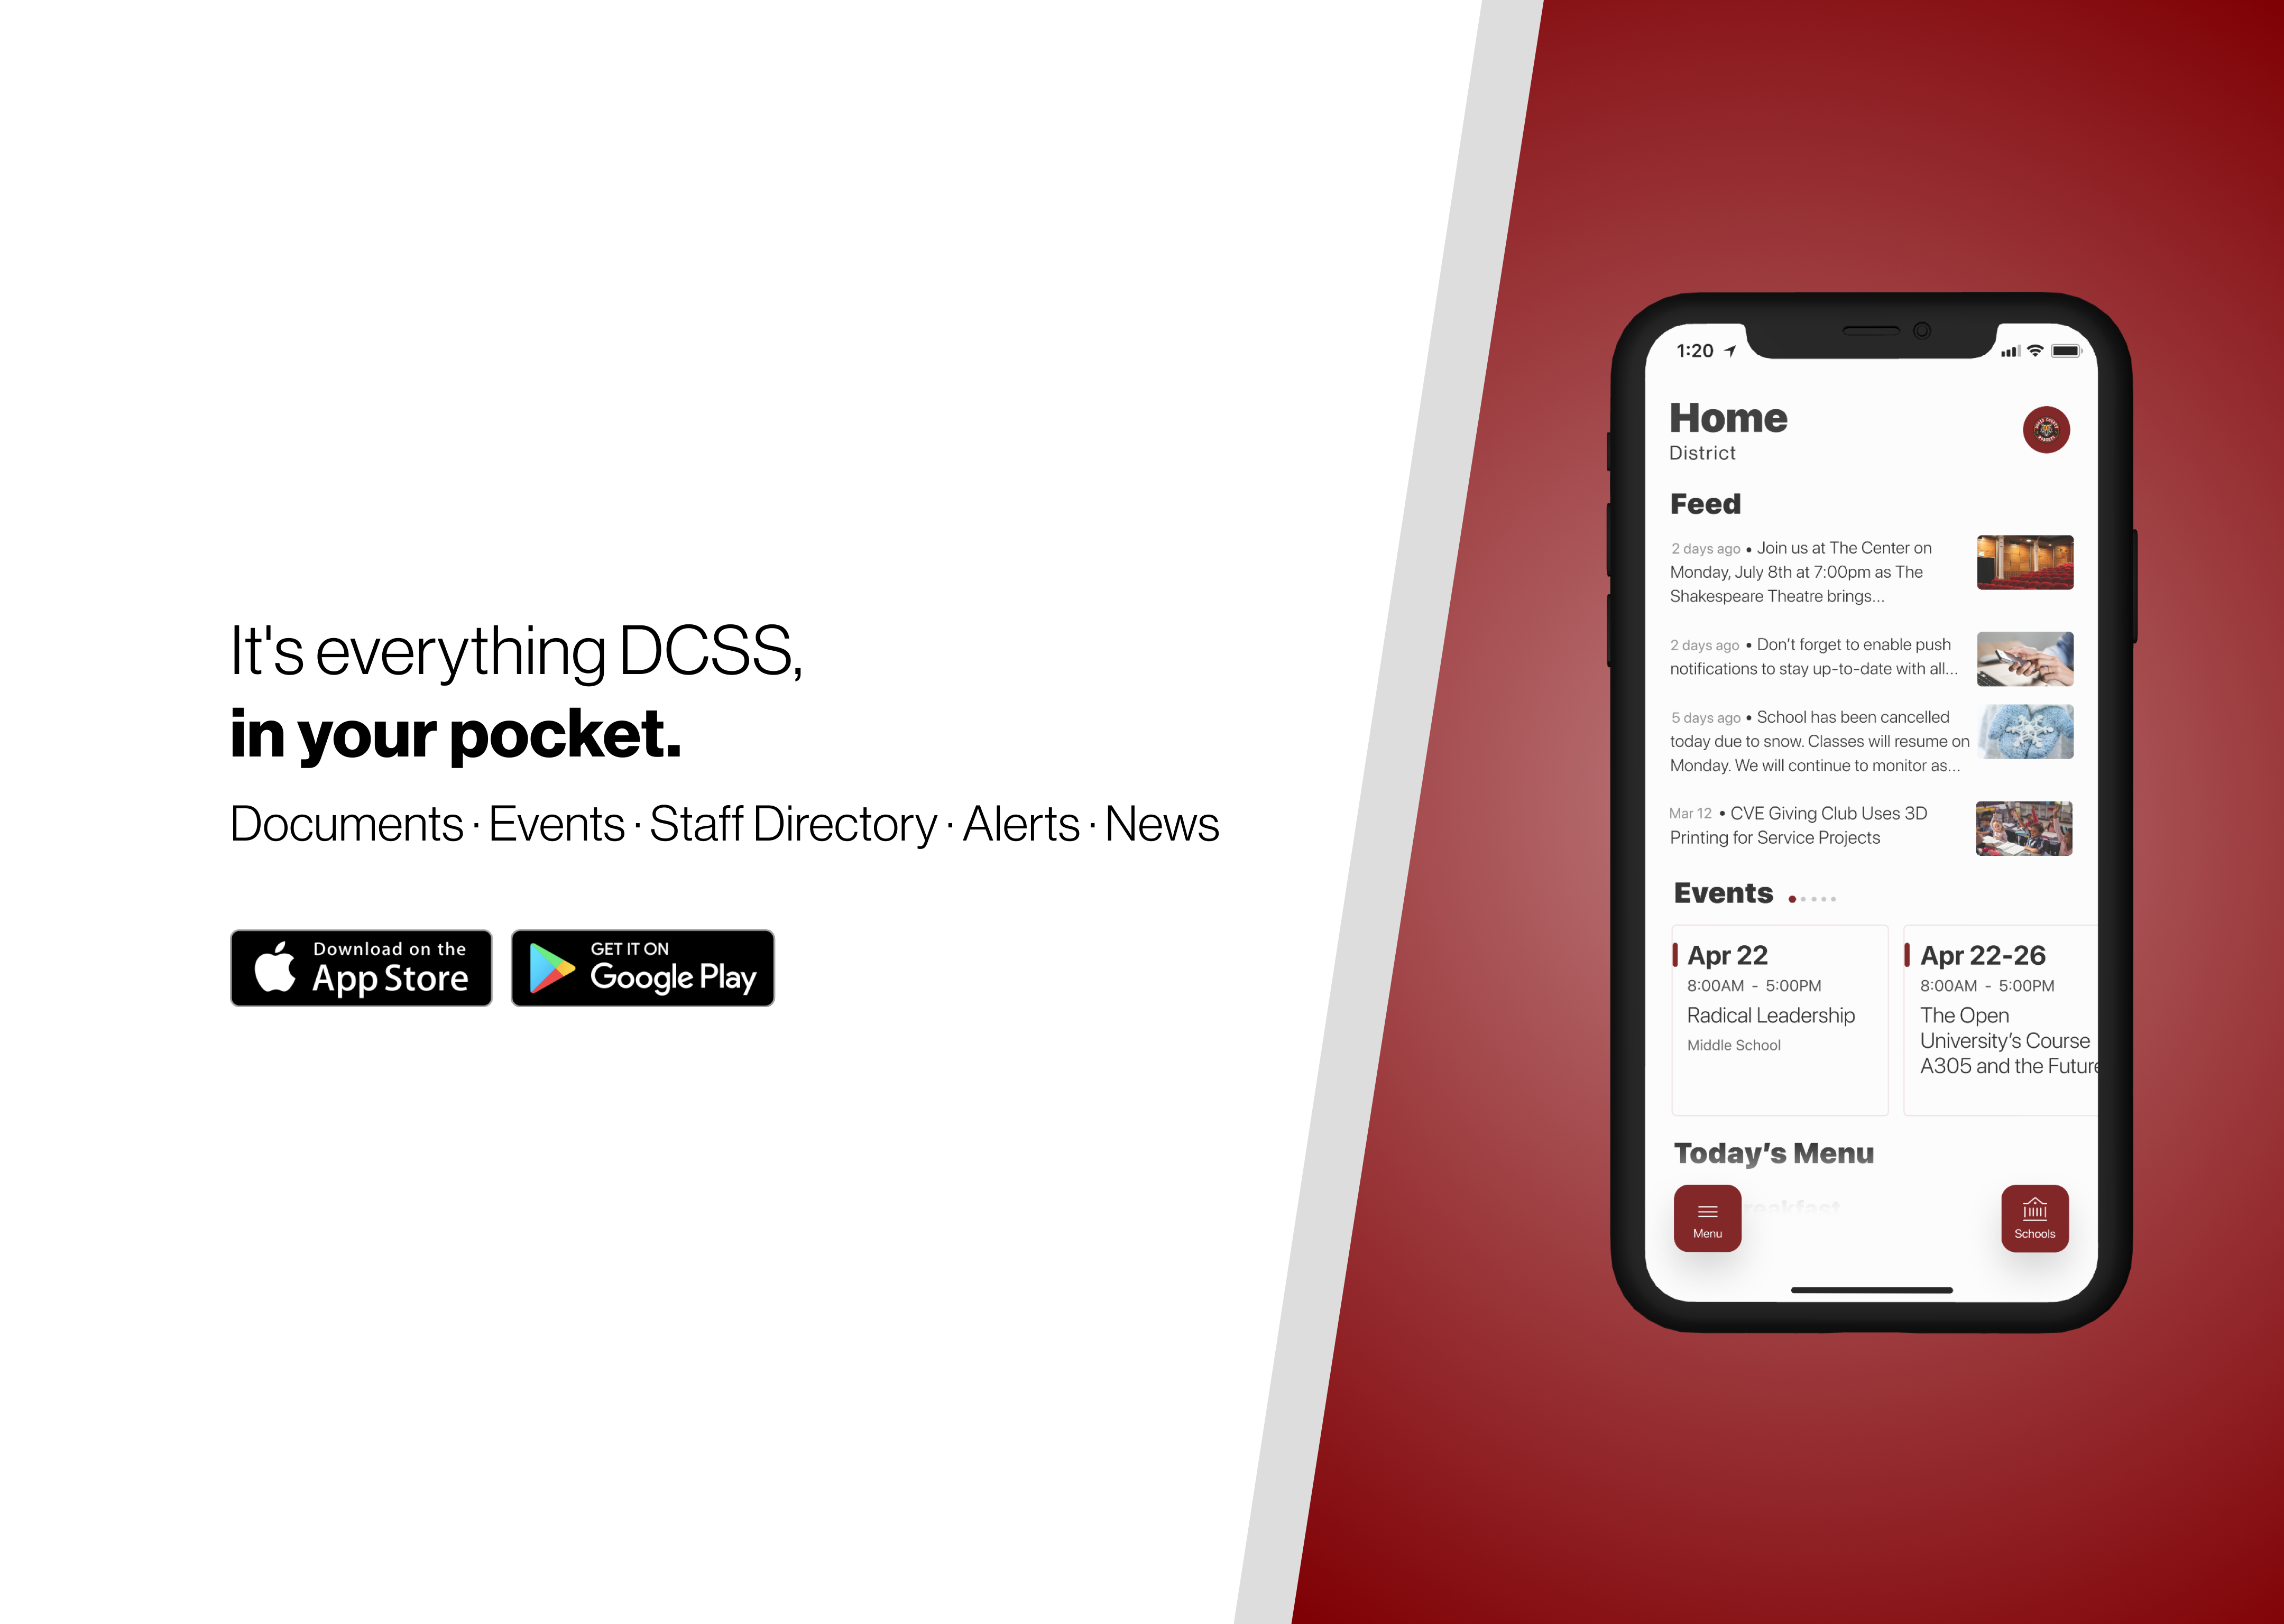 It's everything DCSS in your pocket; Dooly County App; Download on Google Play and App Stores